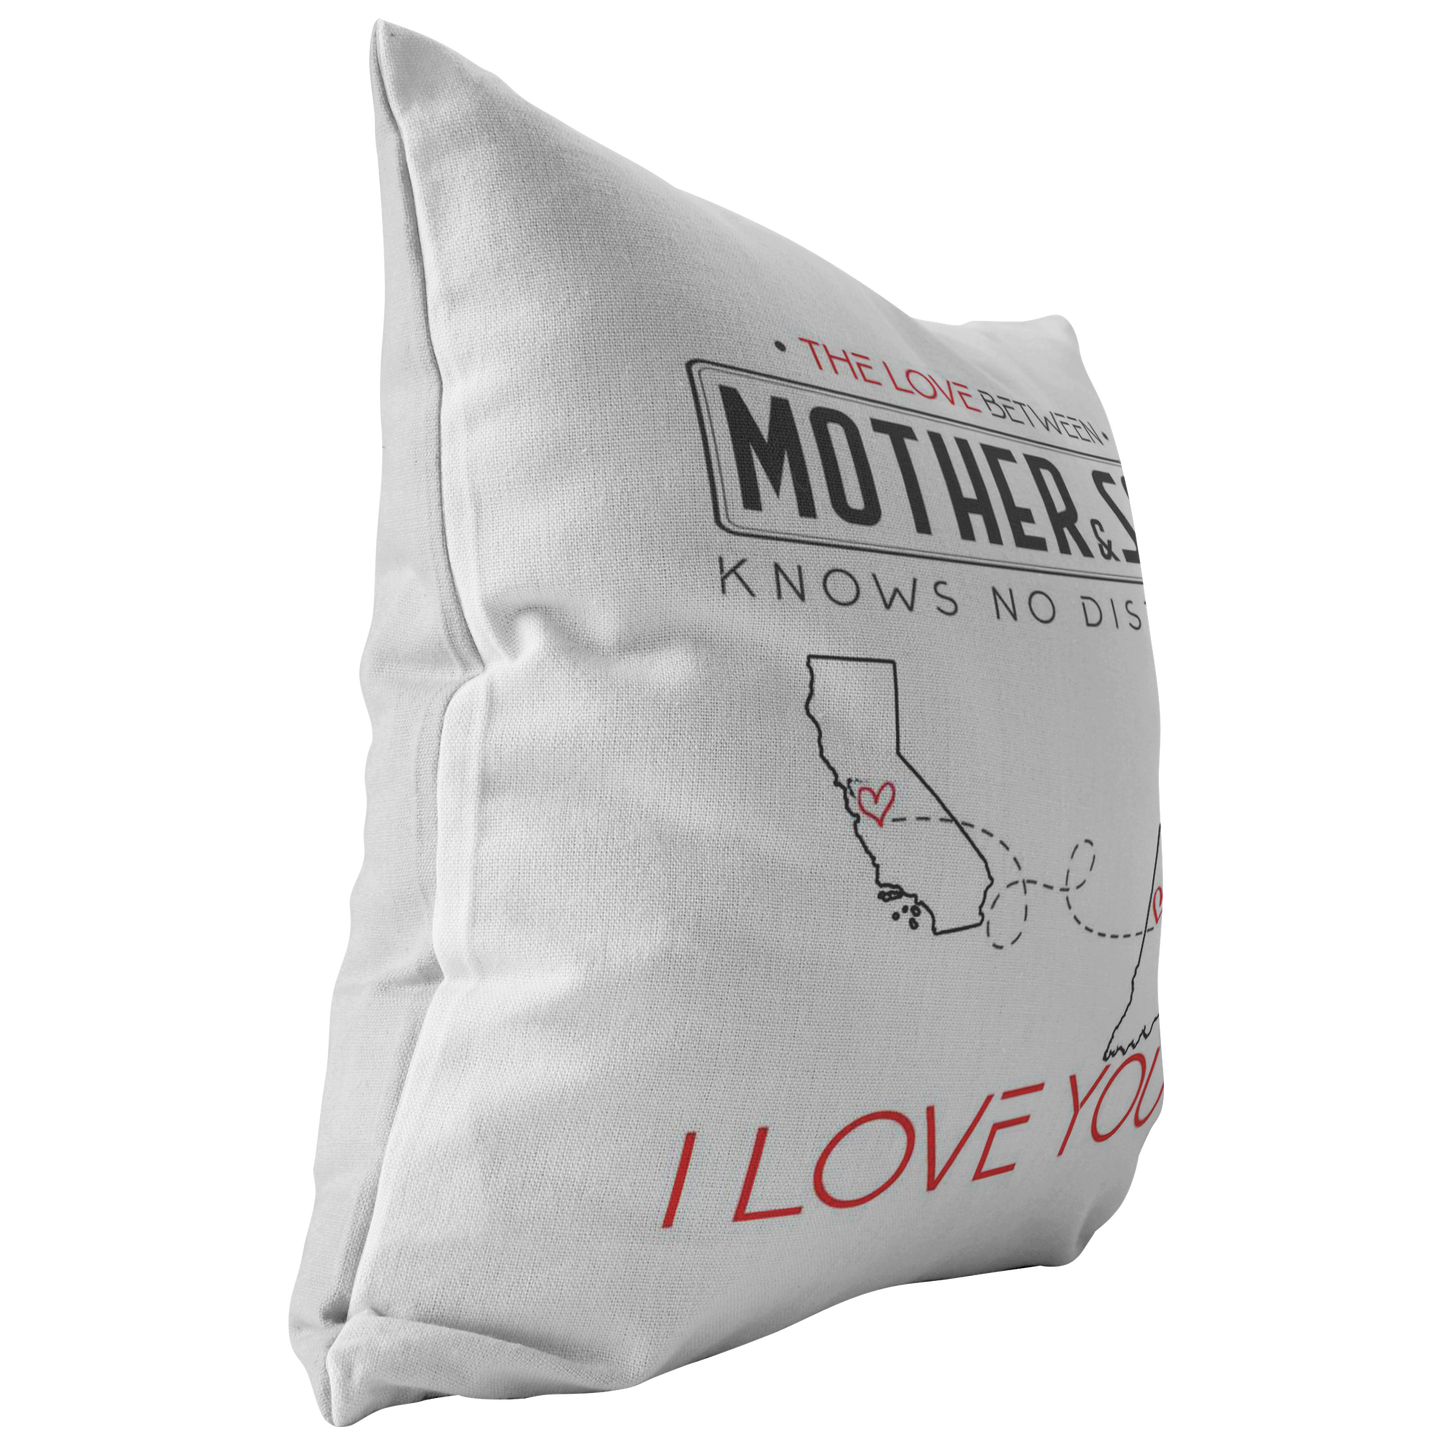 ND-pl20419438-sp-27964 - [ California | Indiana | Mother And Son ] (PI_ThrowPillowCovers) Happy Farhers Day, Mothers Day Decoration Personalized - The